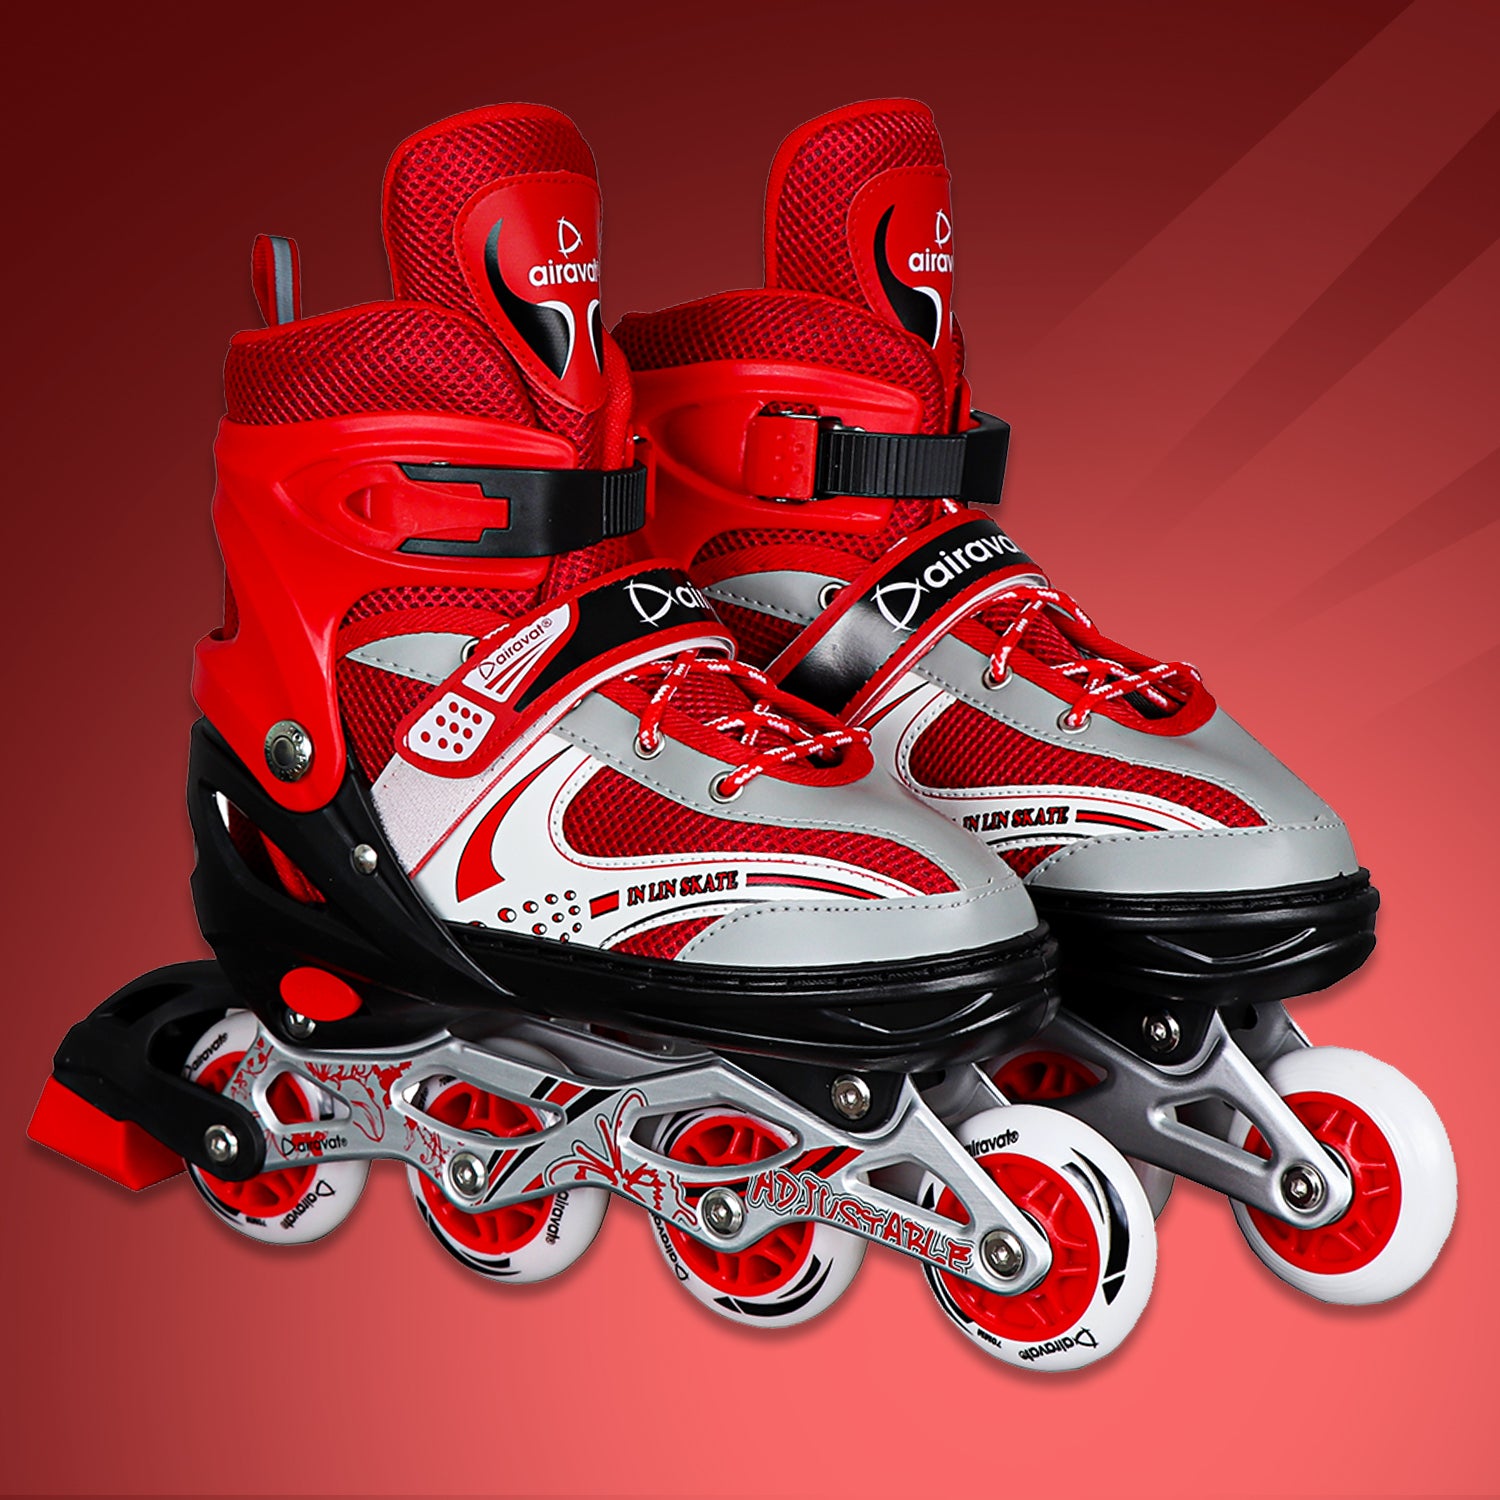 inline-skate-7704-roady-main-image-another-red